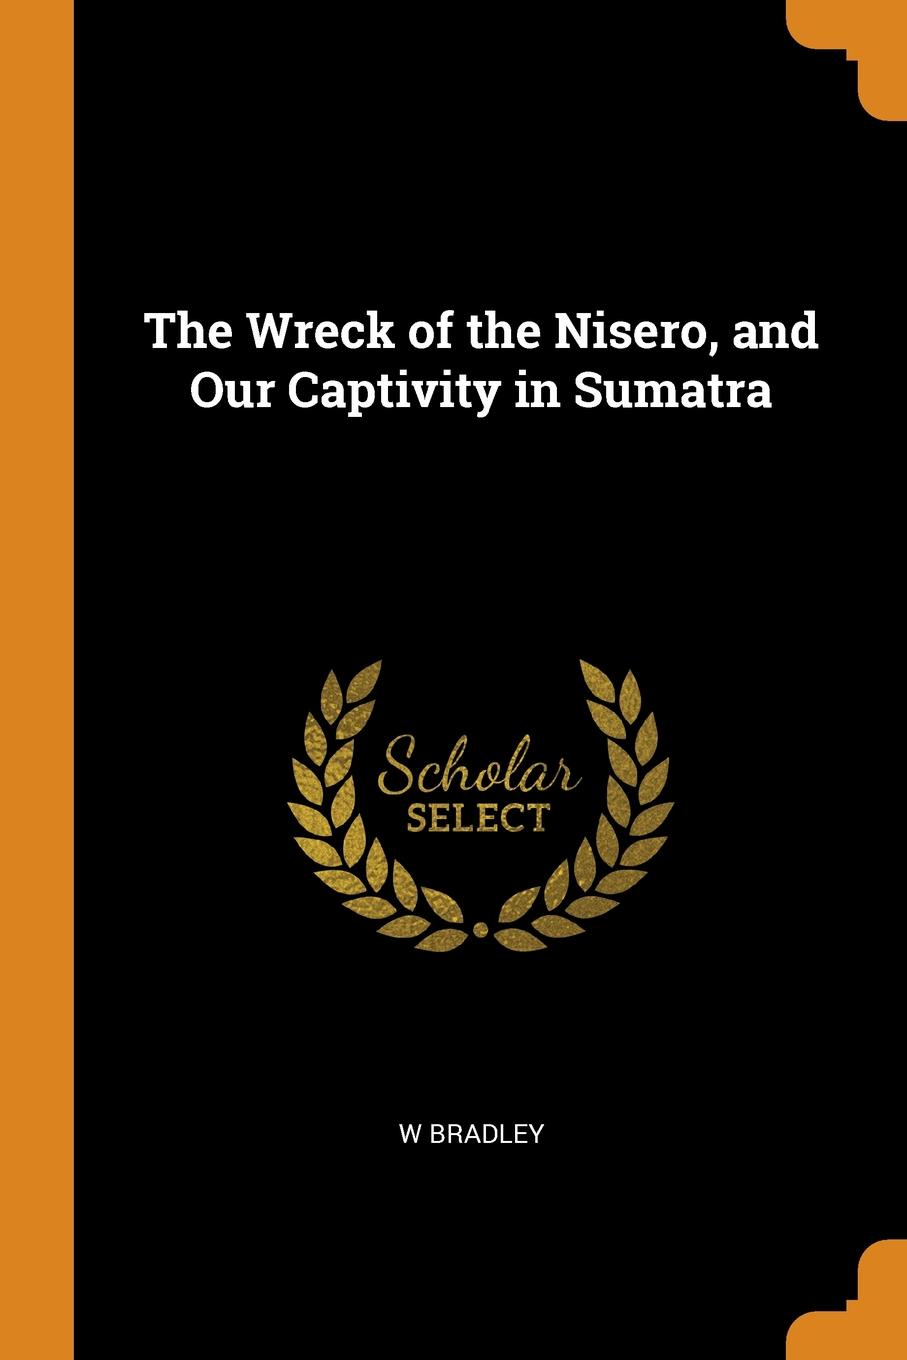 фото The Wreck of the Nisero, and Our Captivity in Sumatra